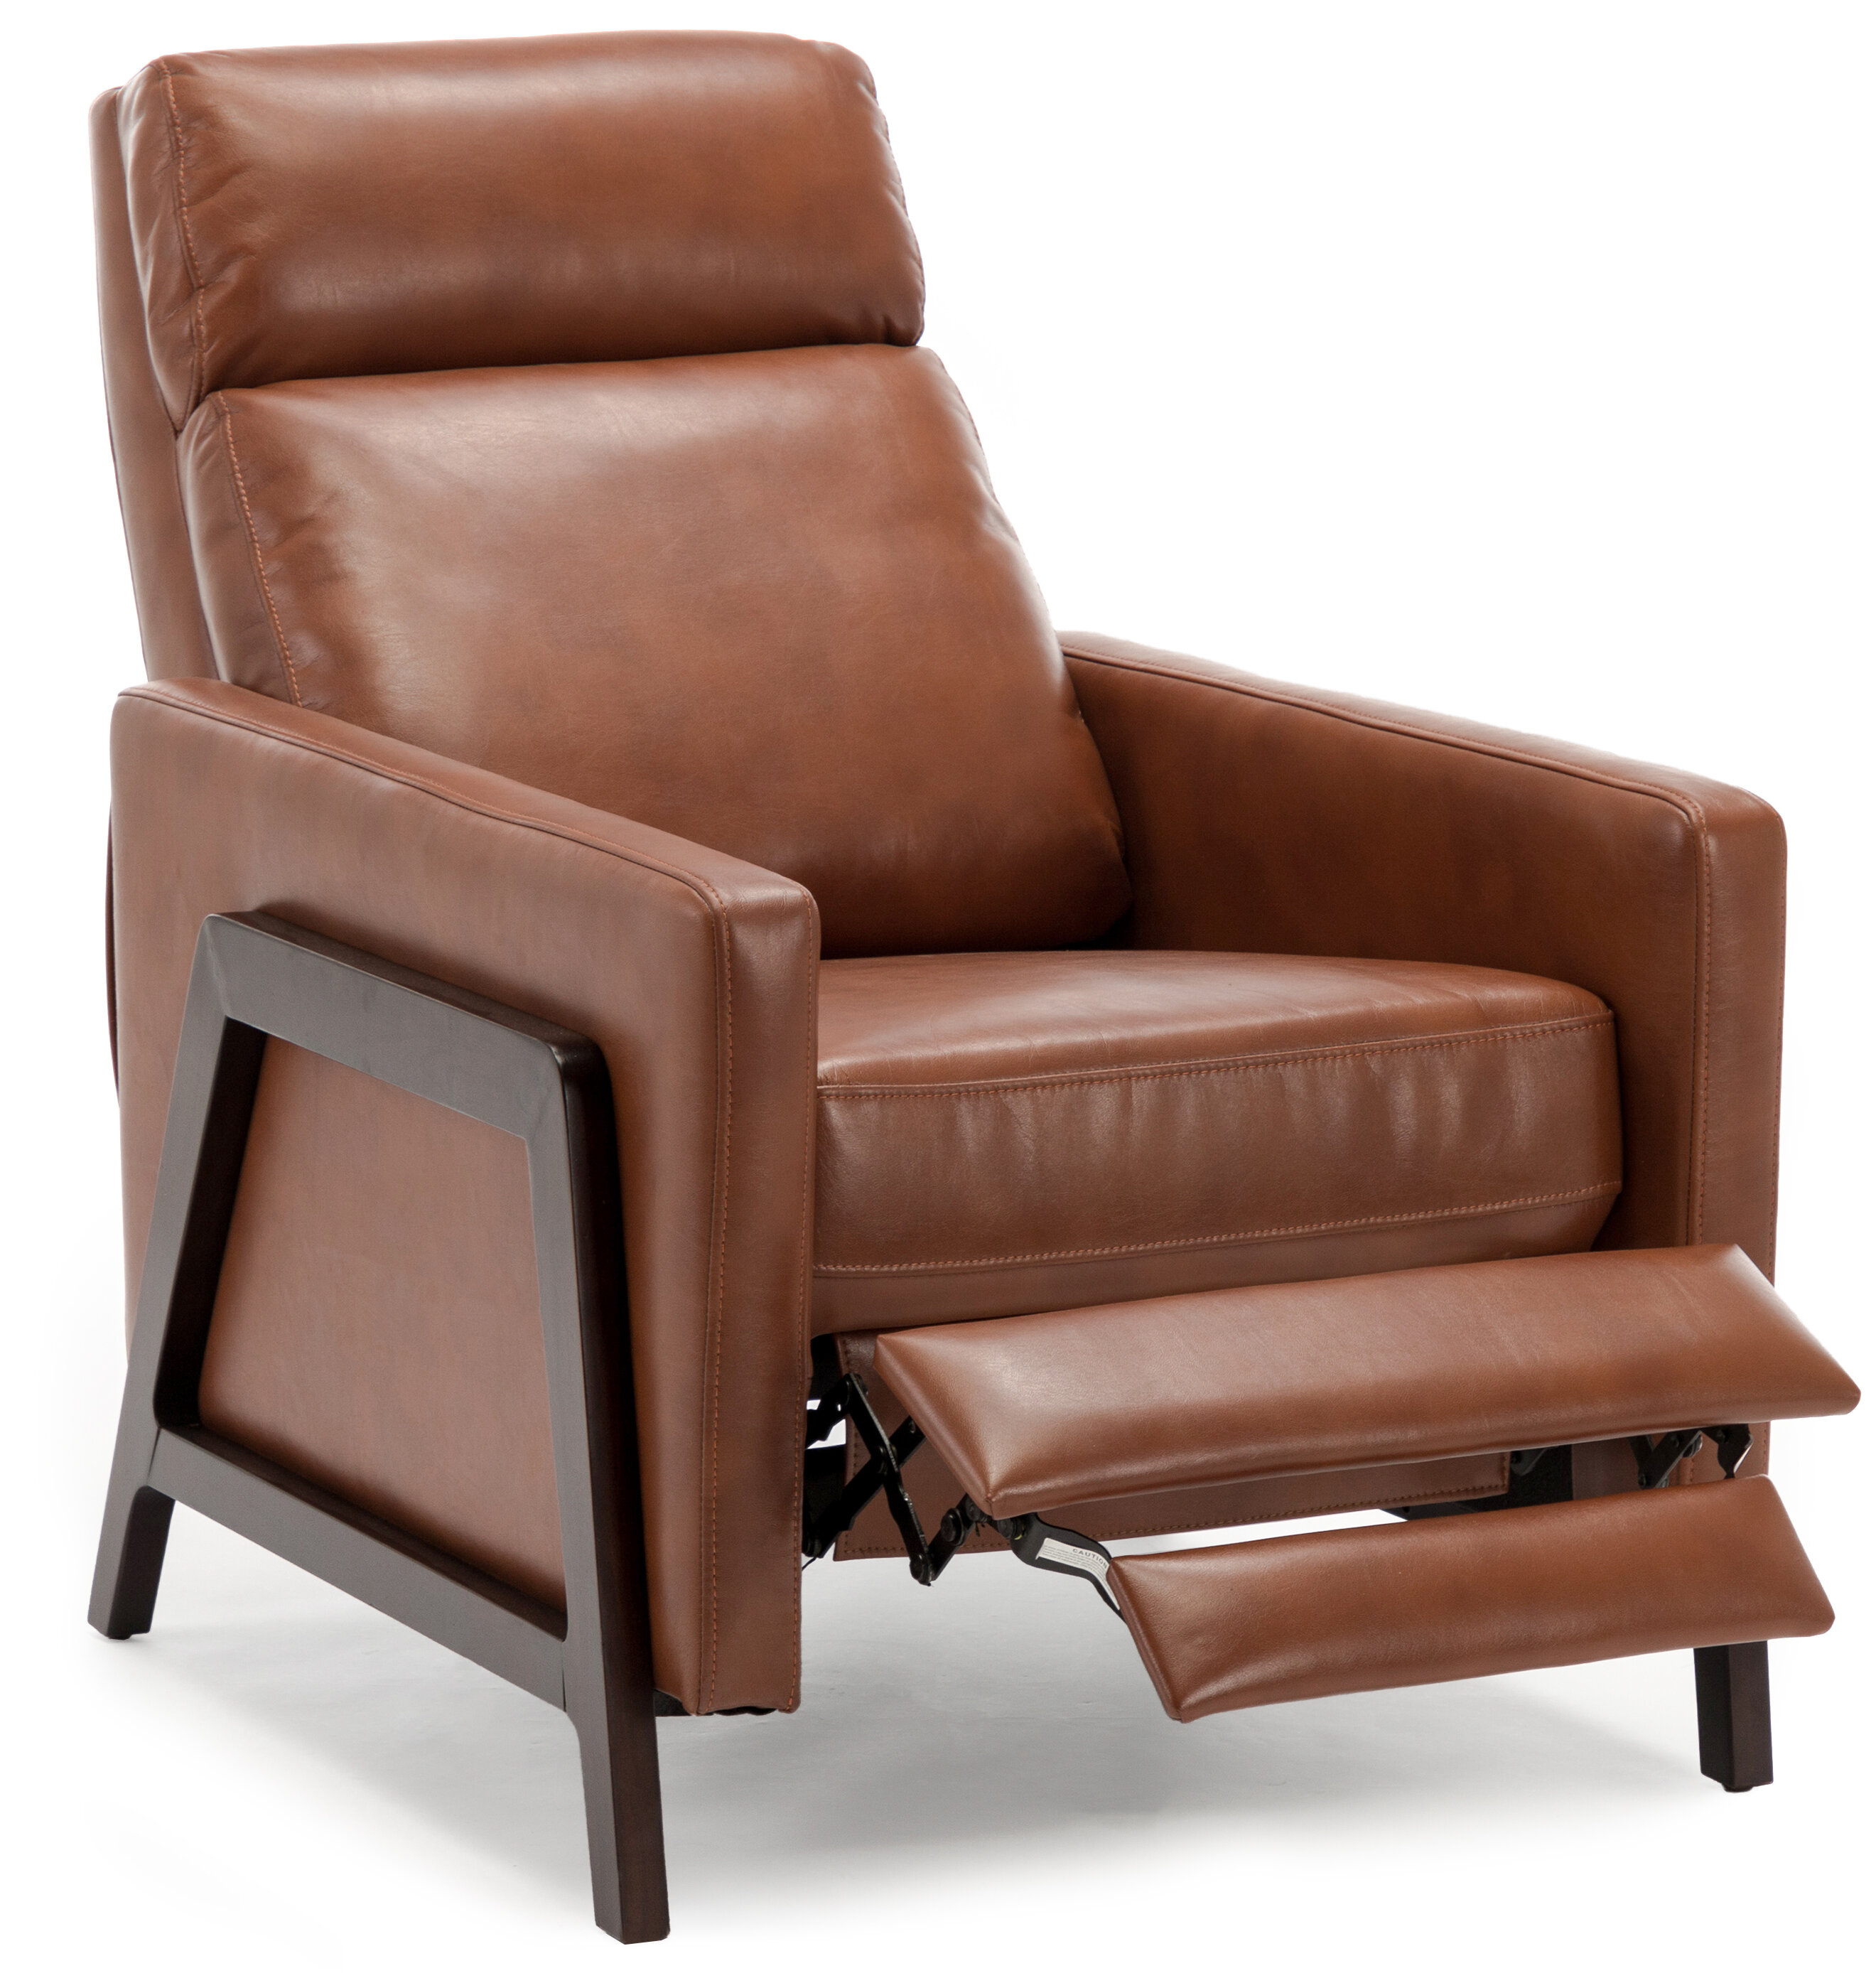 Modern Contemporary Recliners You Ll Love In 2021 Wayfair